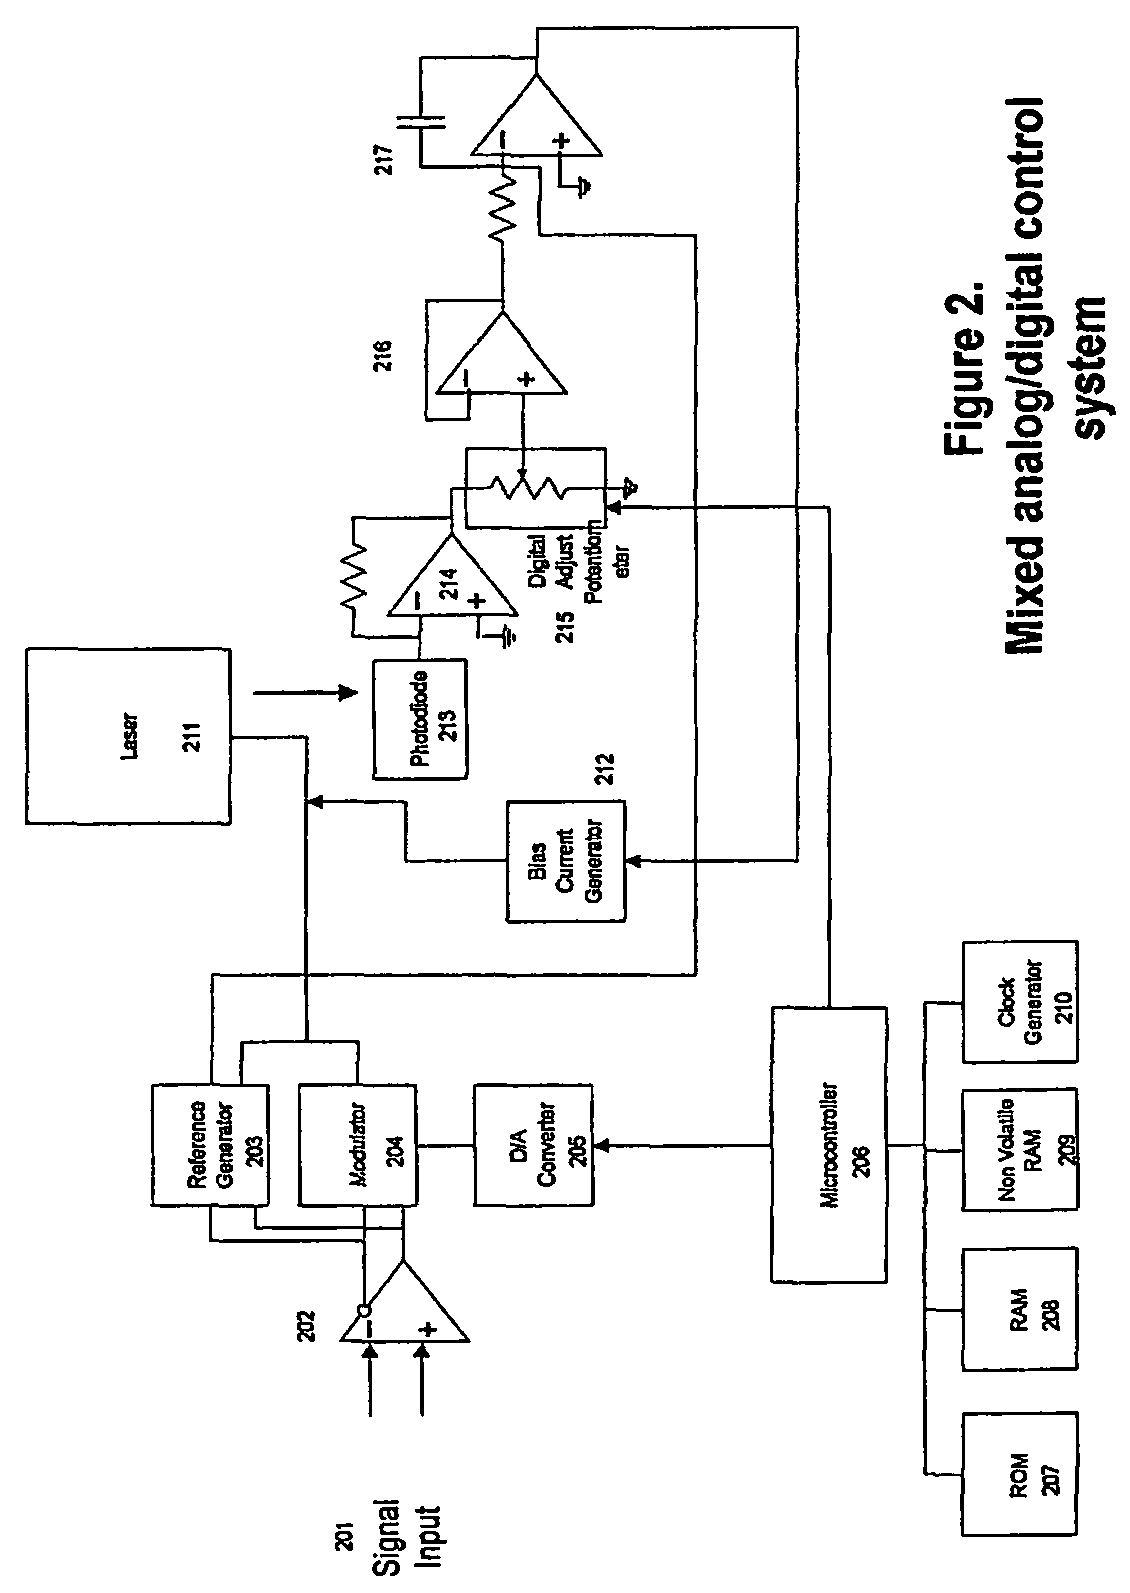 Laser optics integrated control system and method of operation